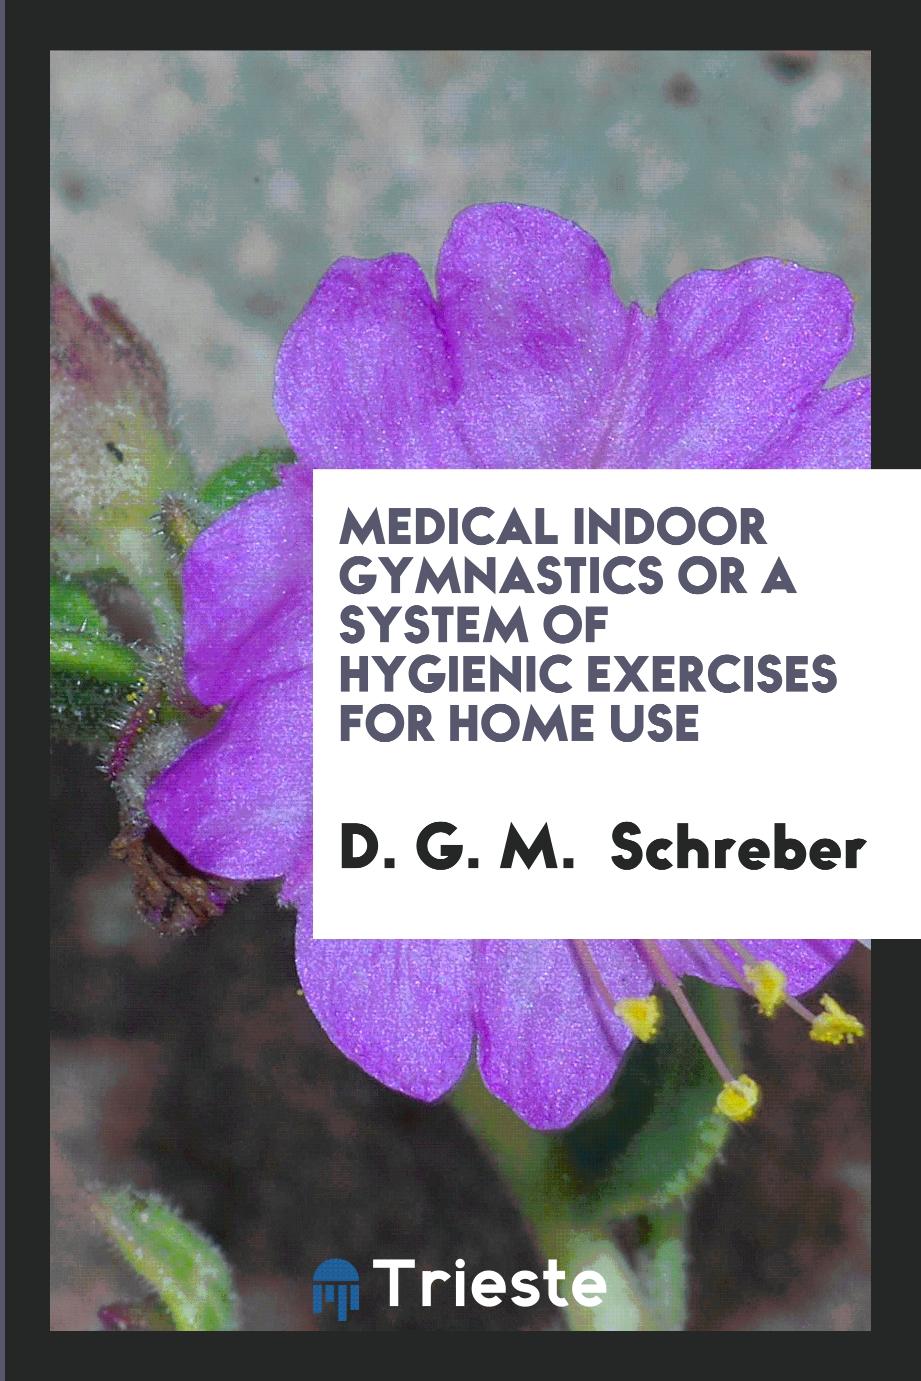 Medical Indoor Gymnastics or a System of Hygienic Exercises for Home Use